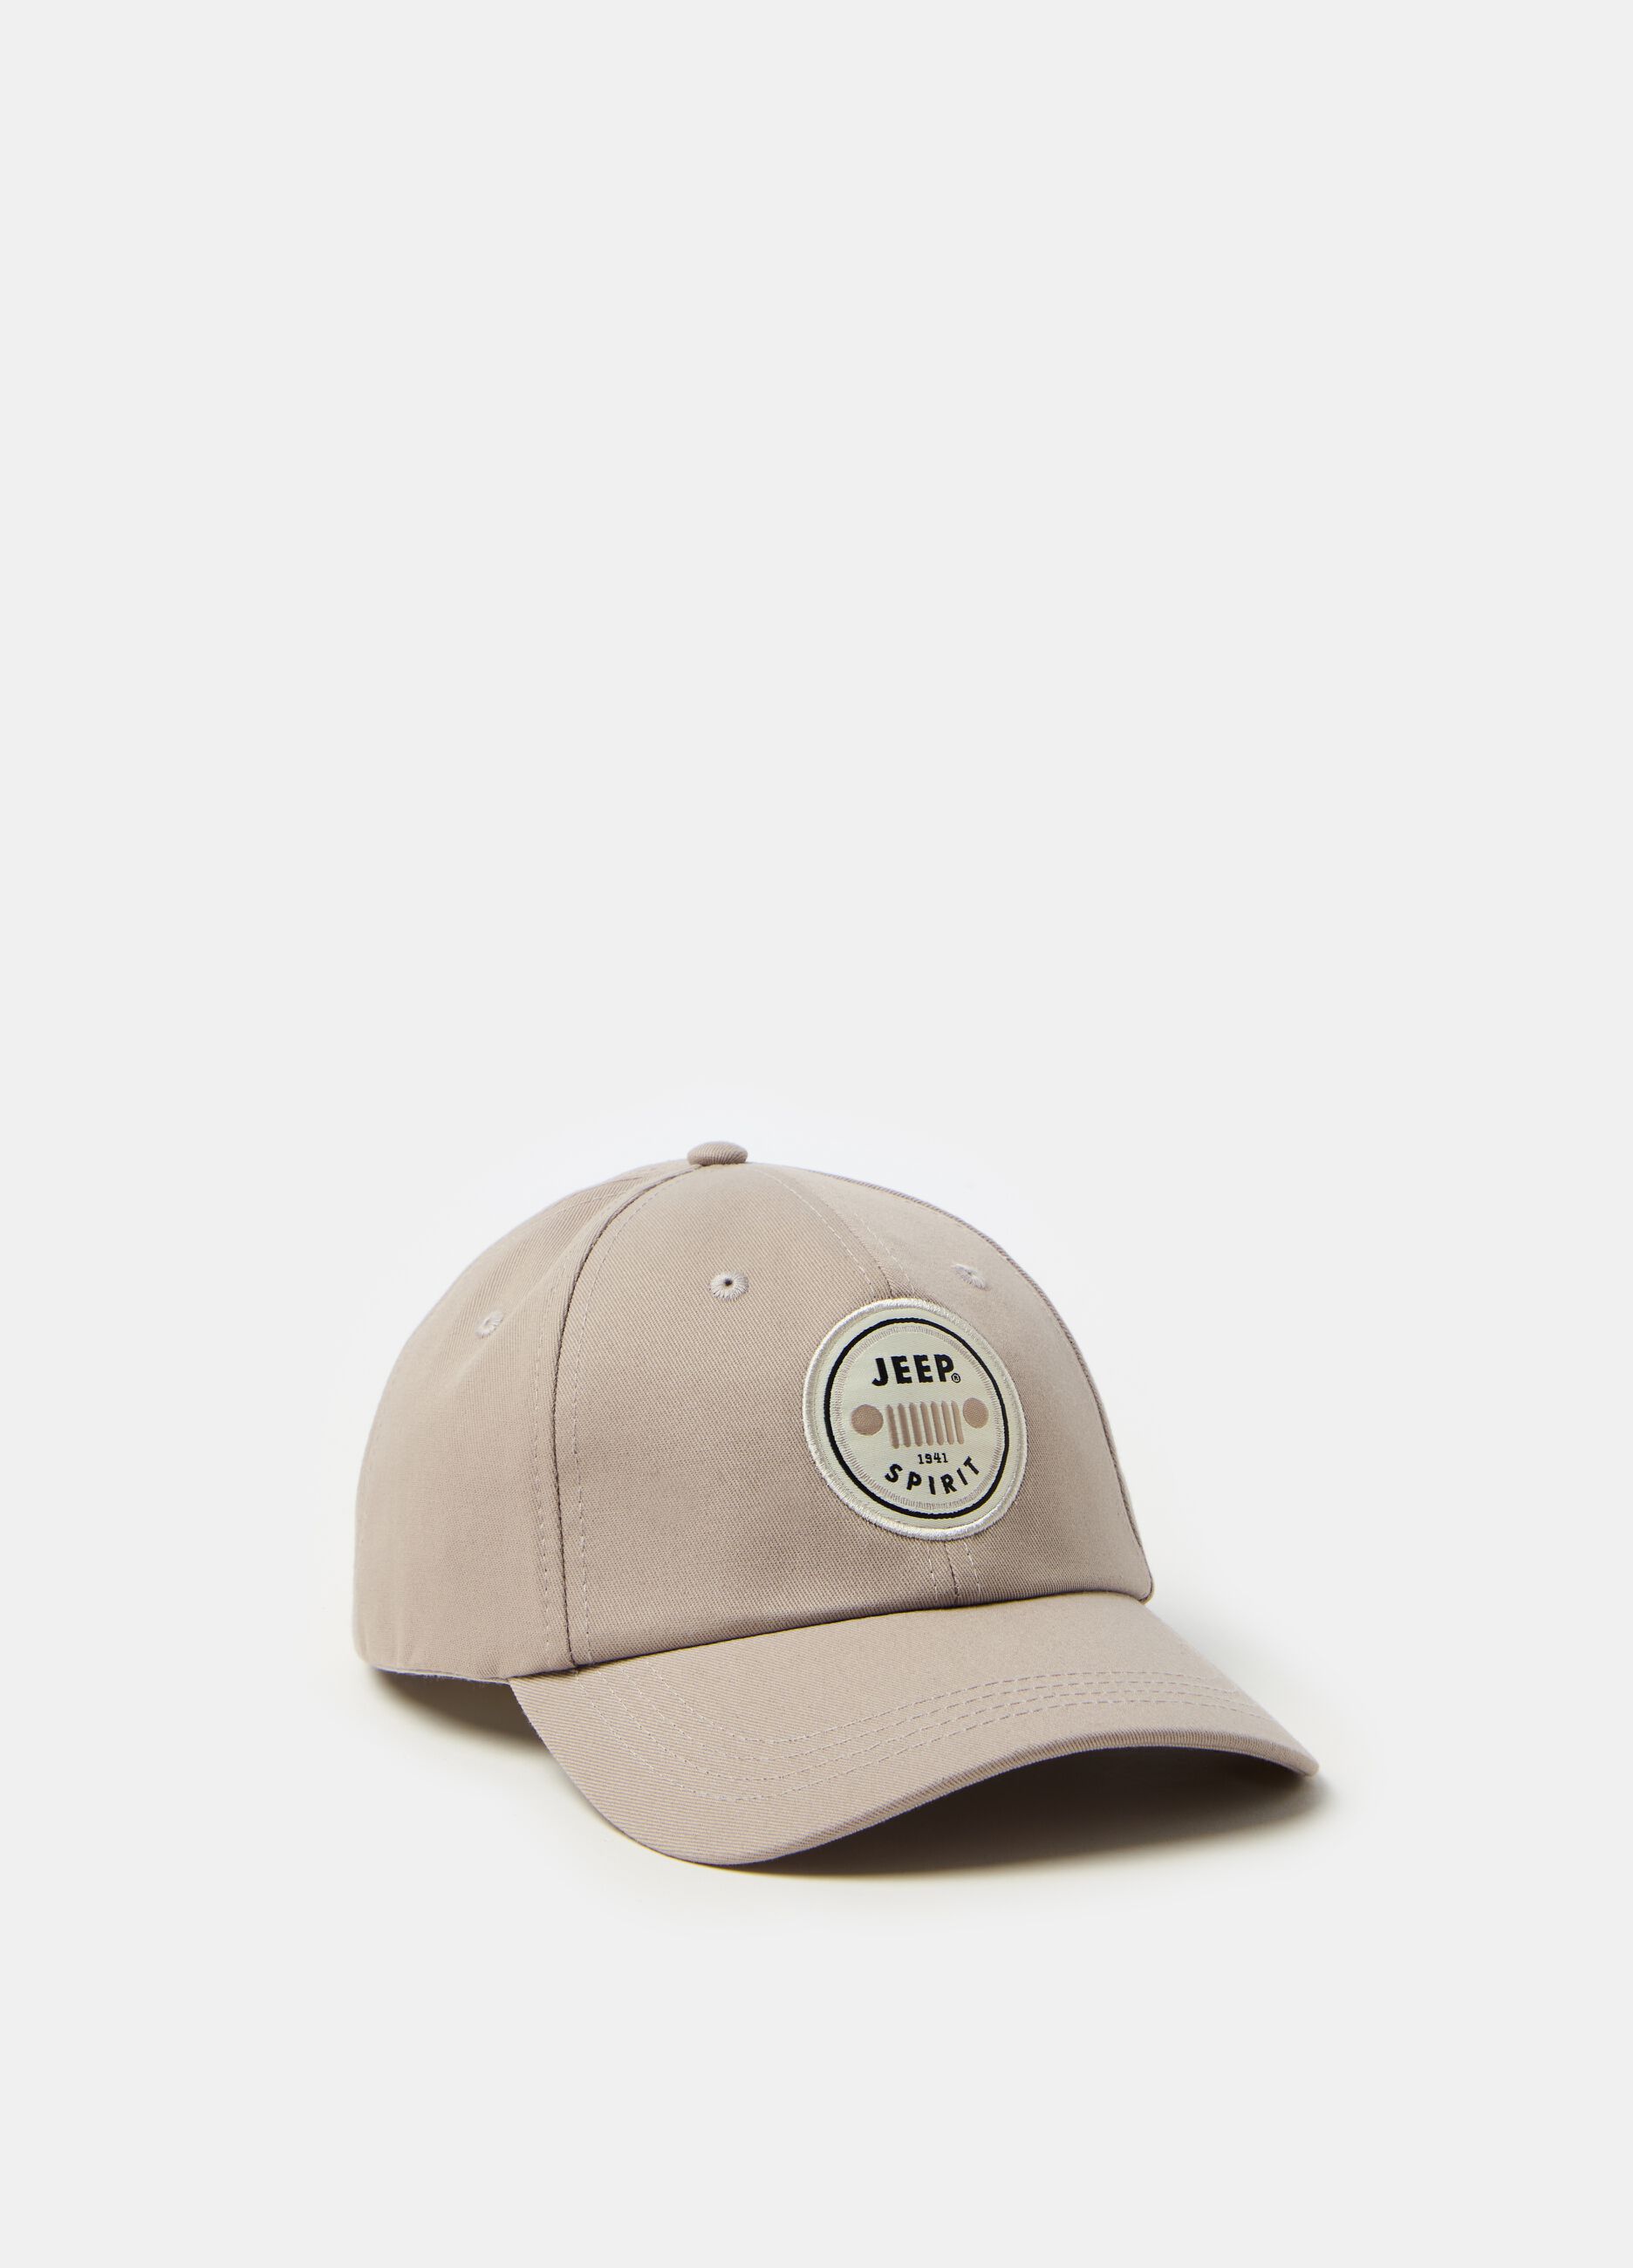 Baseball cap with Jeep patch